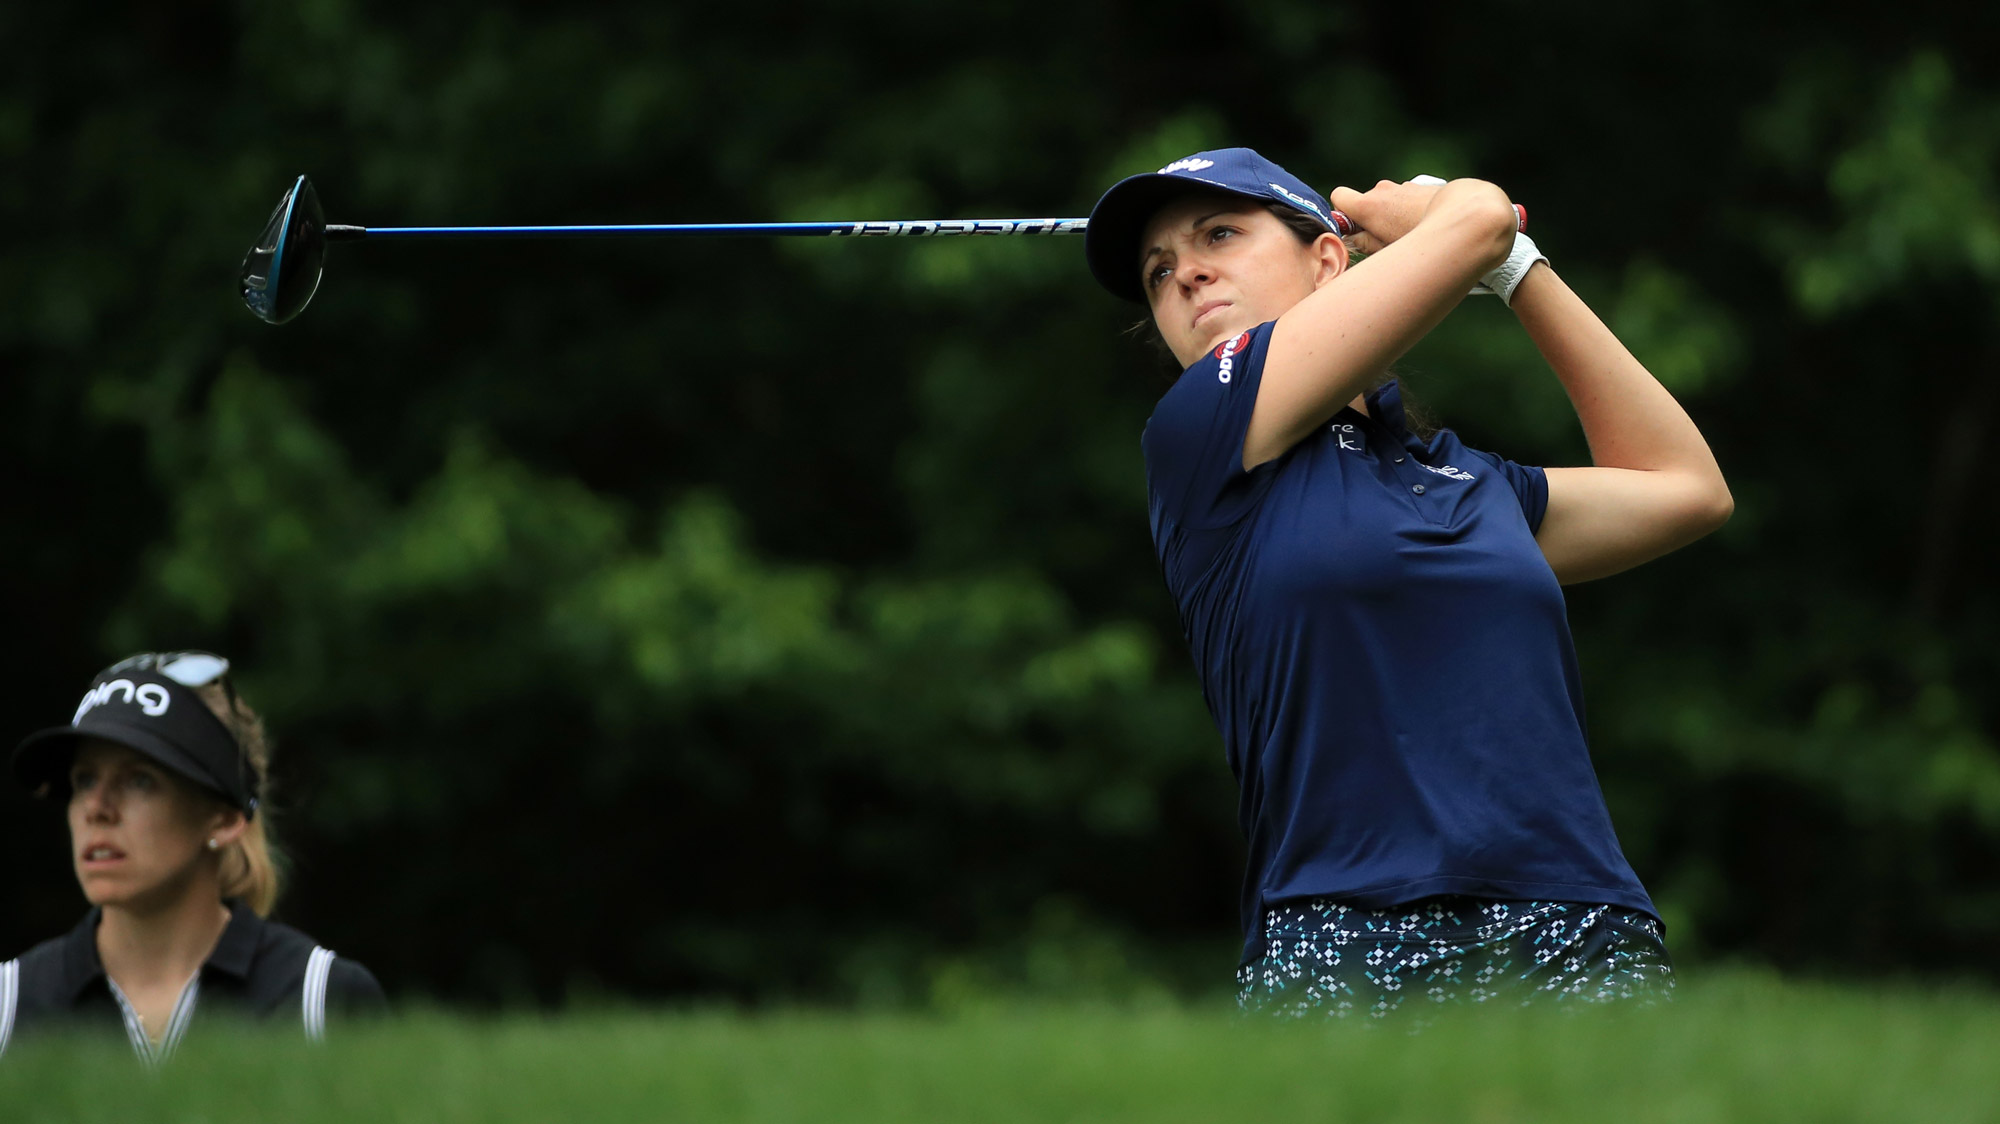 Emma Talley Swings on Day One at the Kingsmill Championship